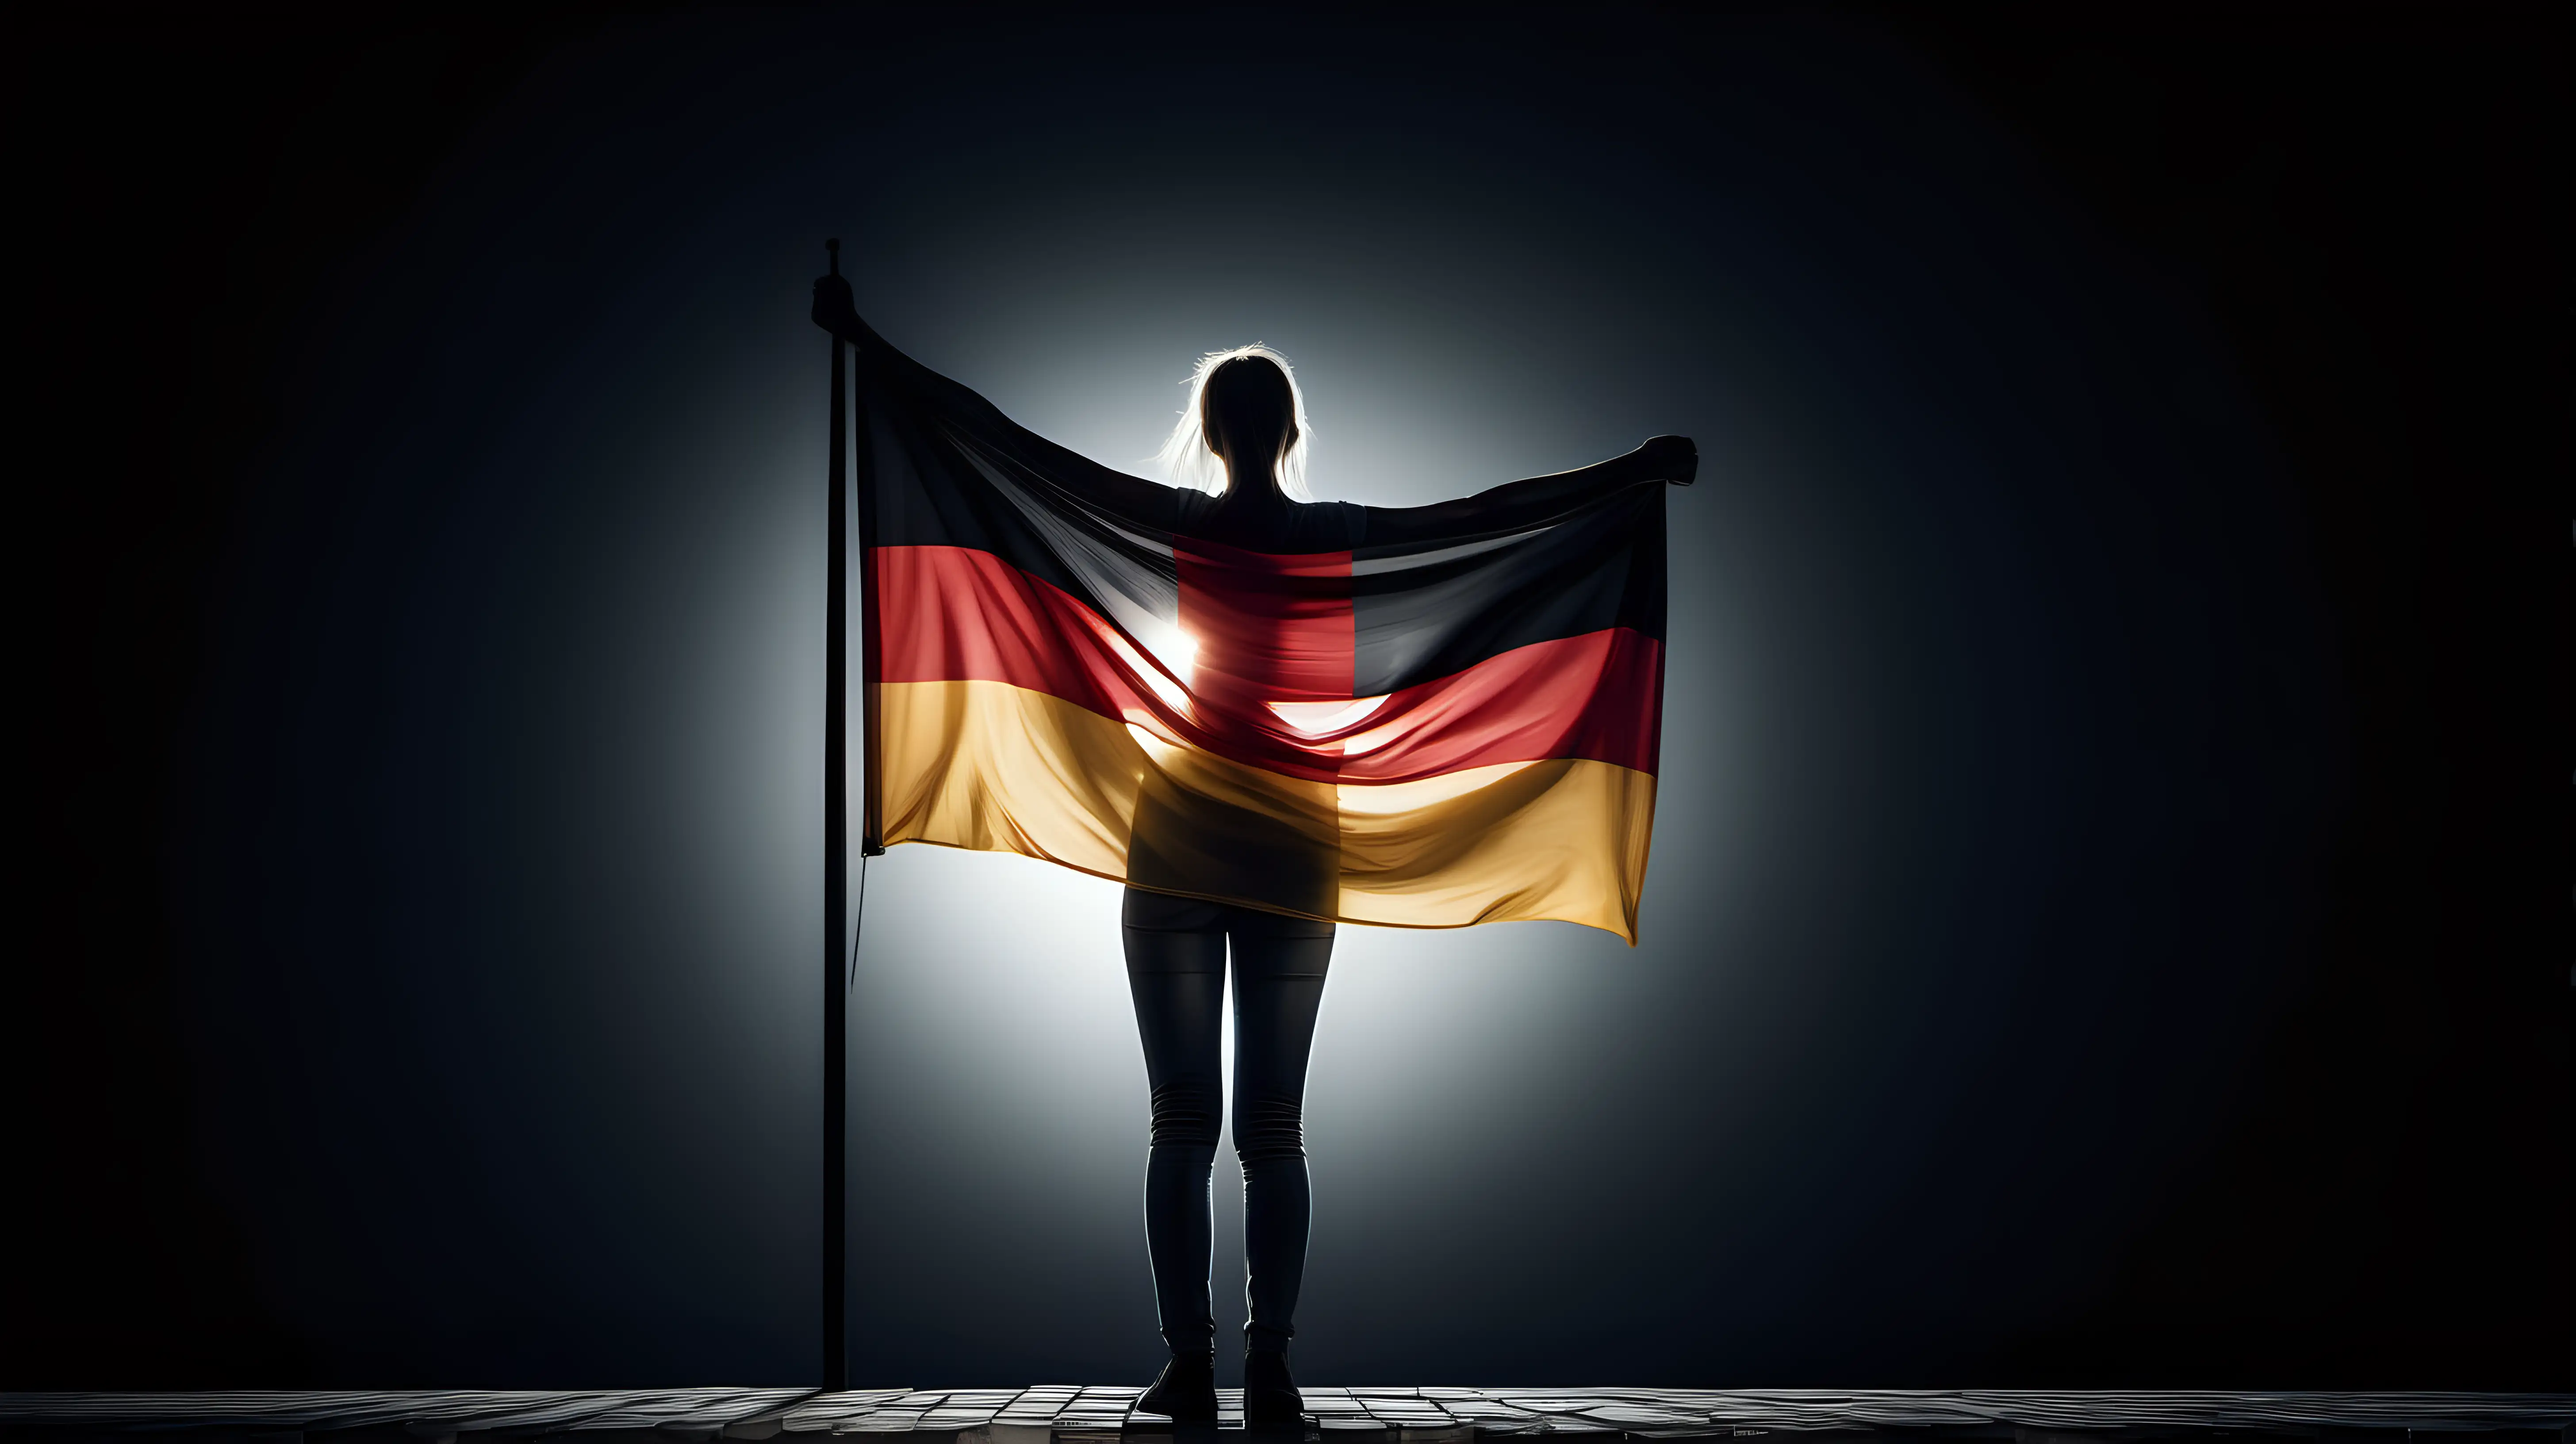 Craft a visually striking scene with a person tightly clutching a luminous German flag in their hands, the radiant colors standing out against the darkness, symbolizing unwavering devotion to their homeland.